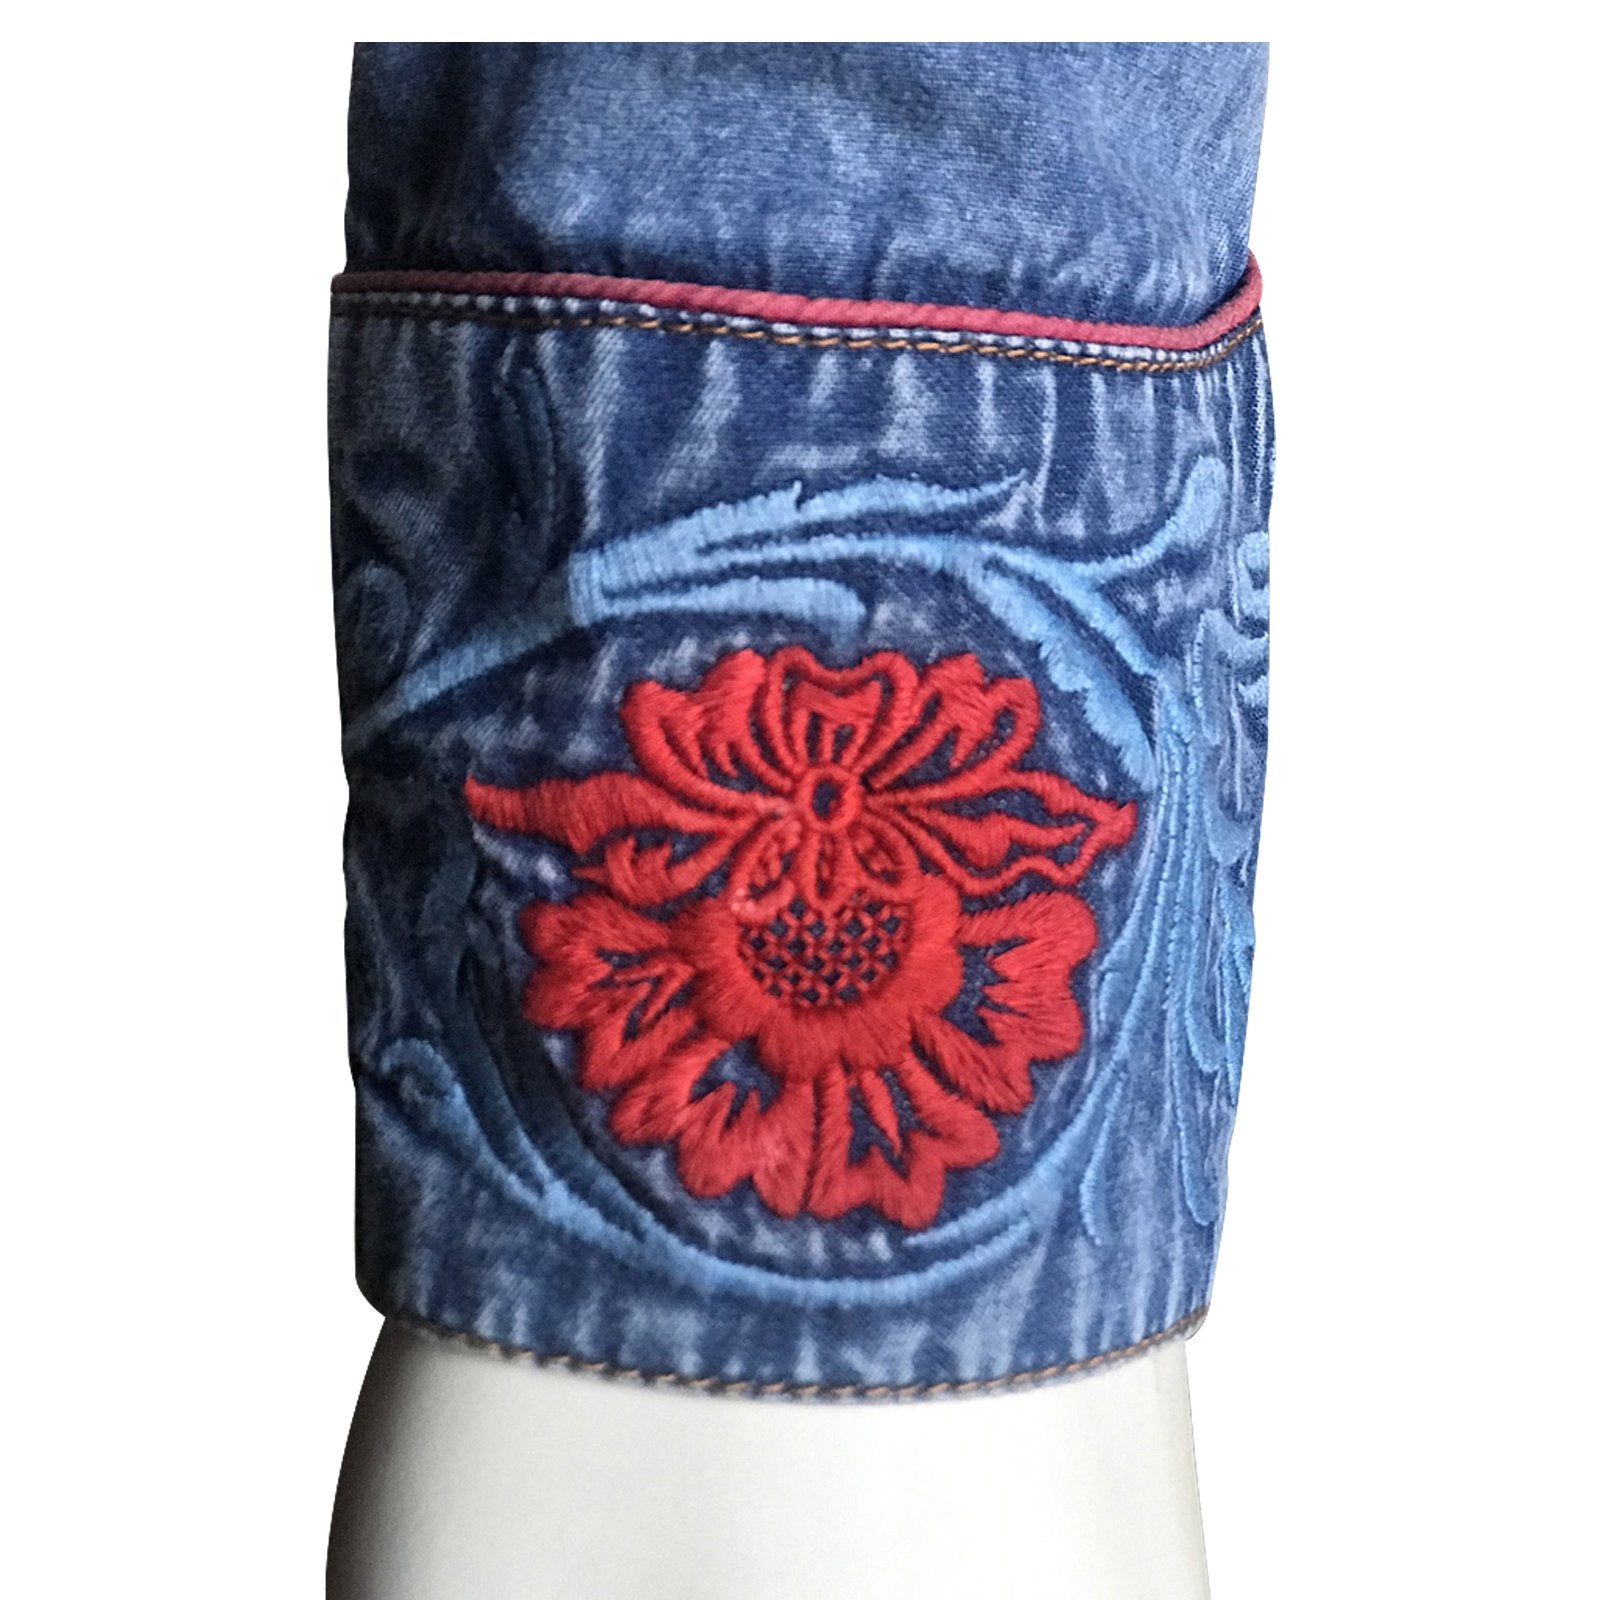 Rockmount Ranch Wear Men's Embroidered Roses on Denim Cuff